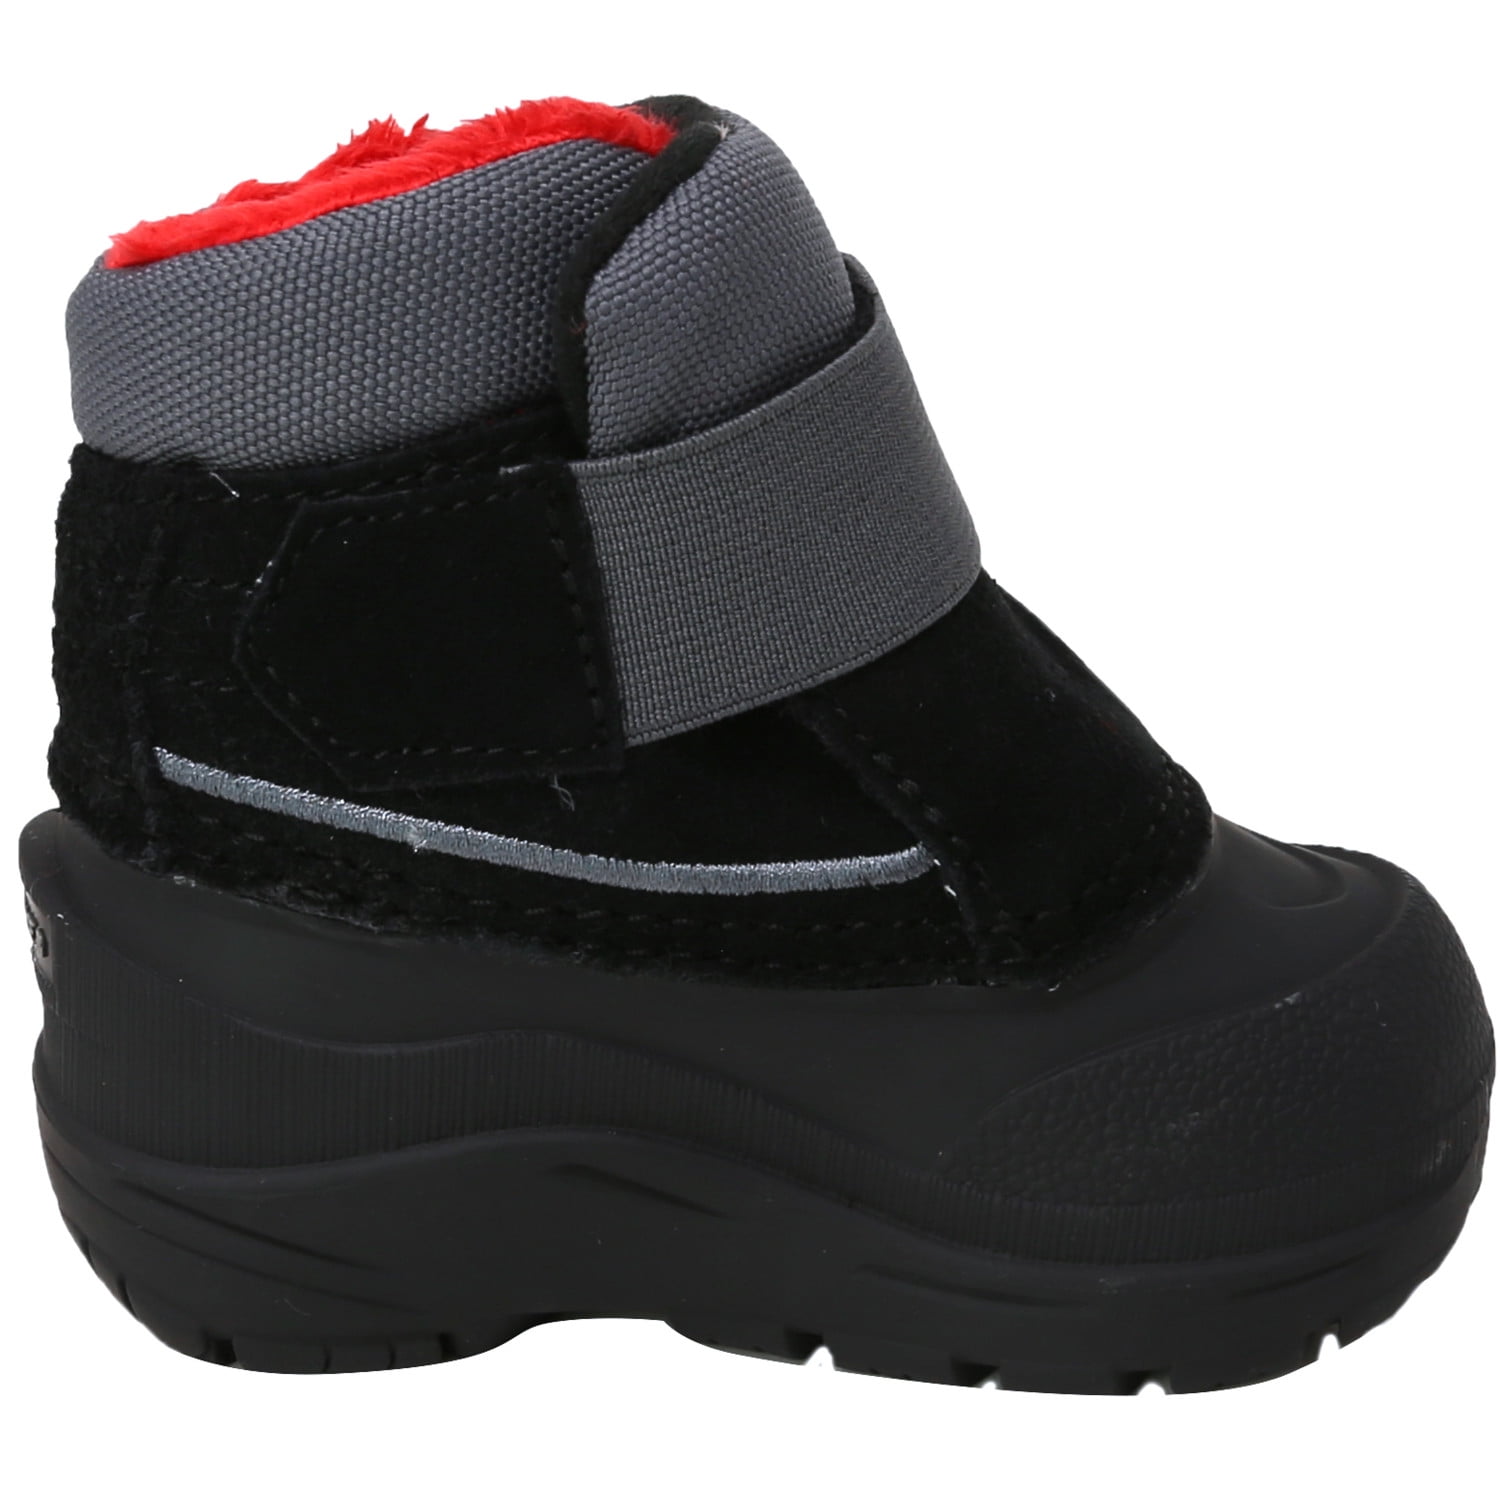 north face kids boots